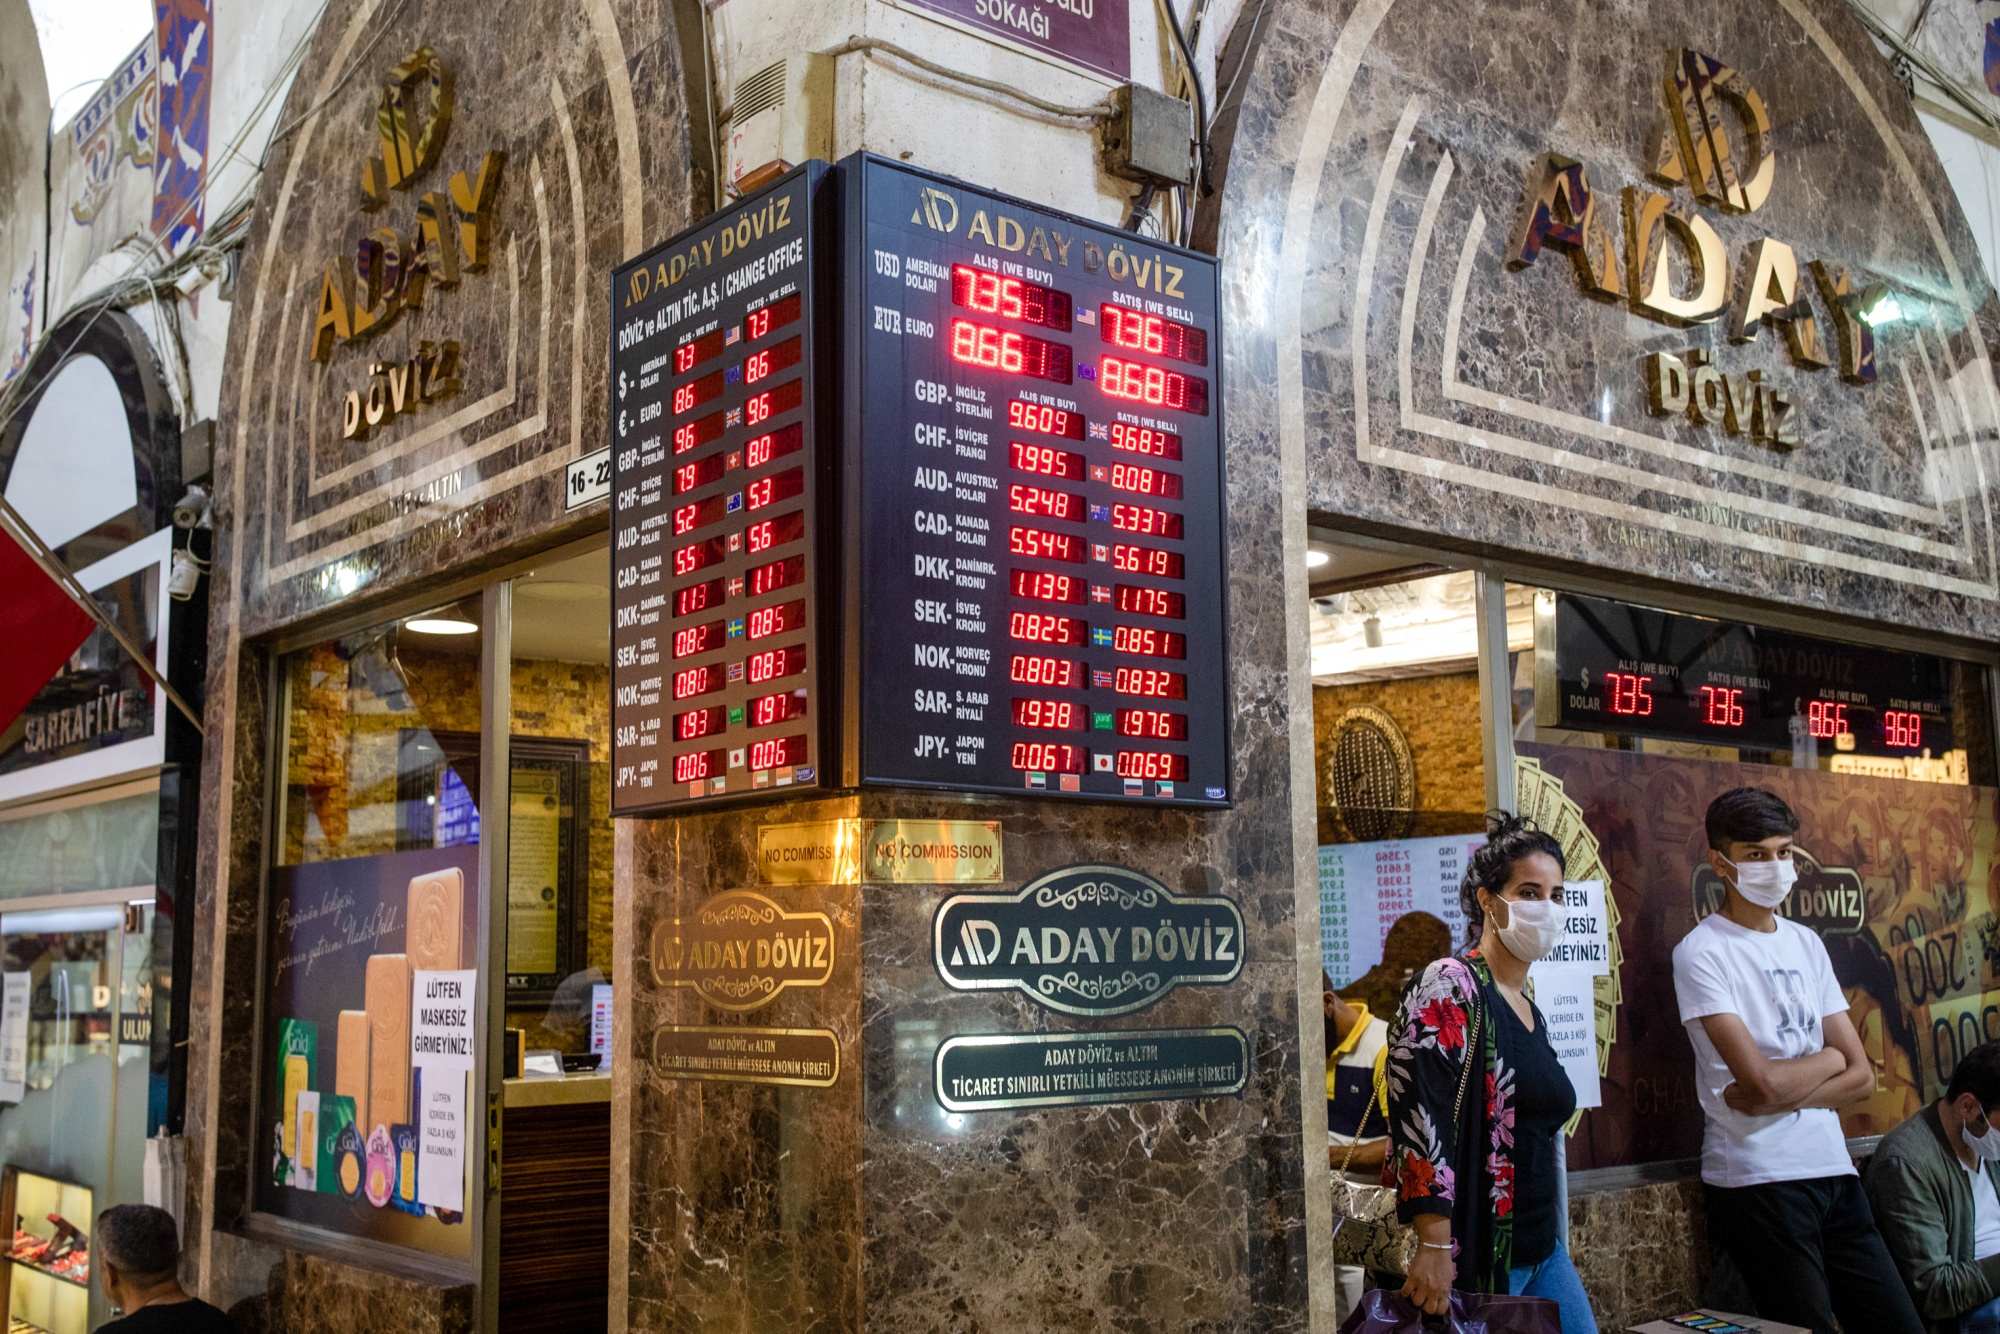 Customers wearing protective face masks exit a Bureau de Change currency and gold exchange shop in the Grand Bazaar, in Istanbul.